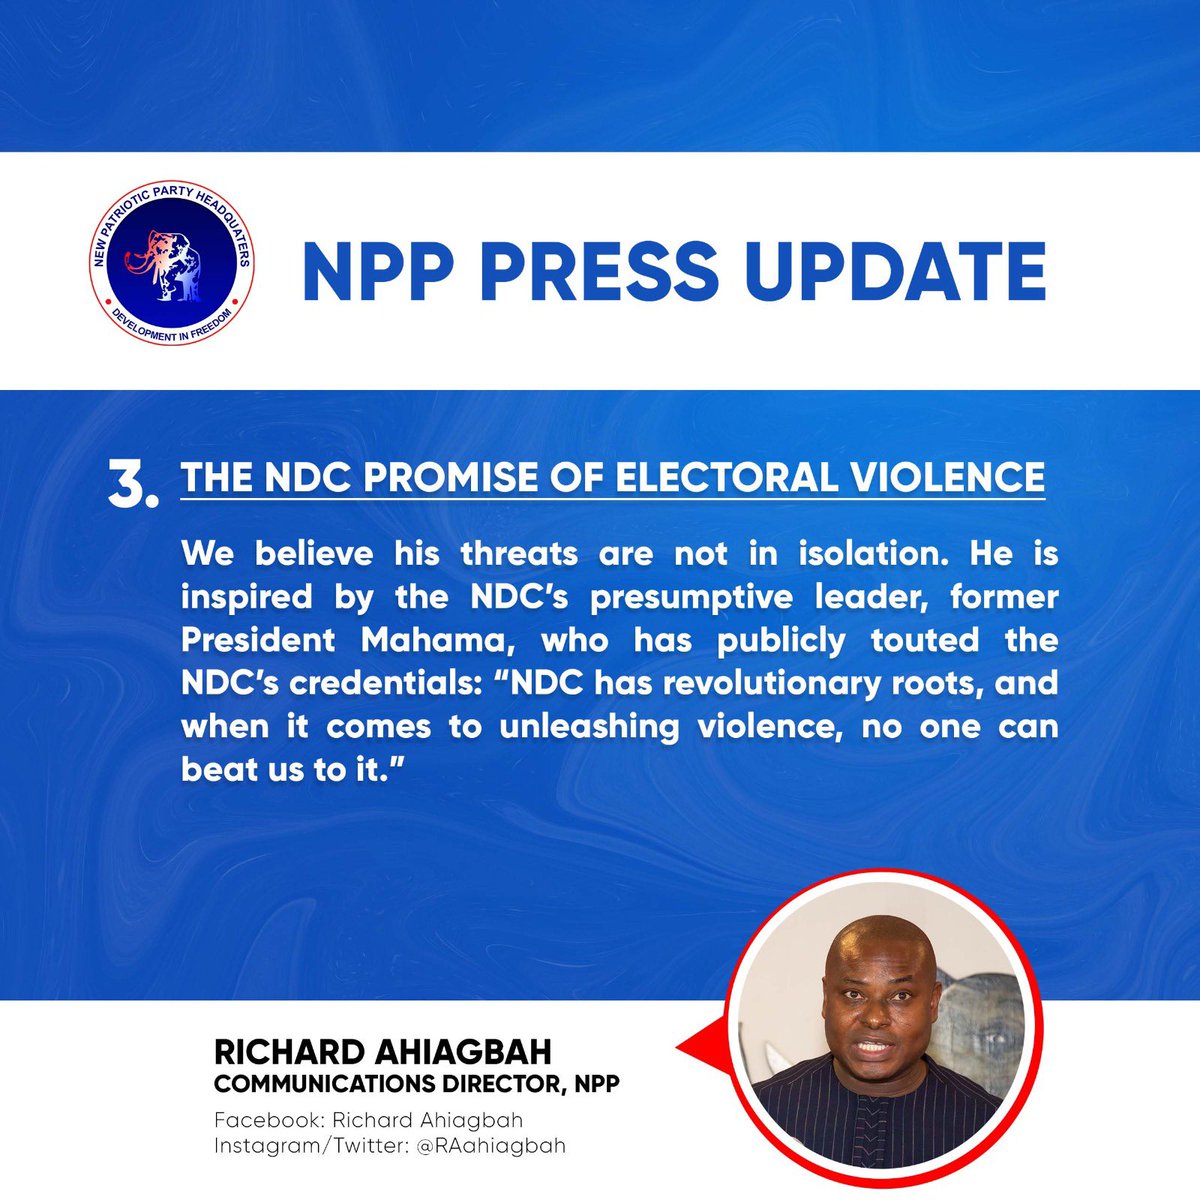 Press Conference By The New Patriotic Party By The National Communications Director, Richard Ahiagbah

#PressUpdatebyNPP
#PressUpdate #Truth #GoodGovernance
#PauseAndSaySomething